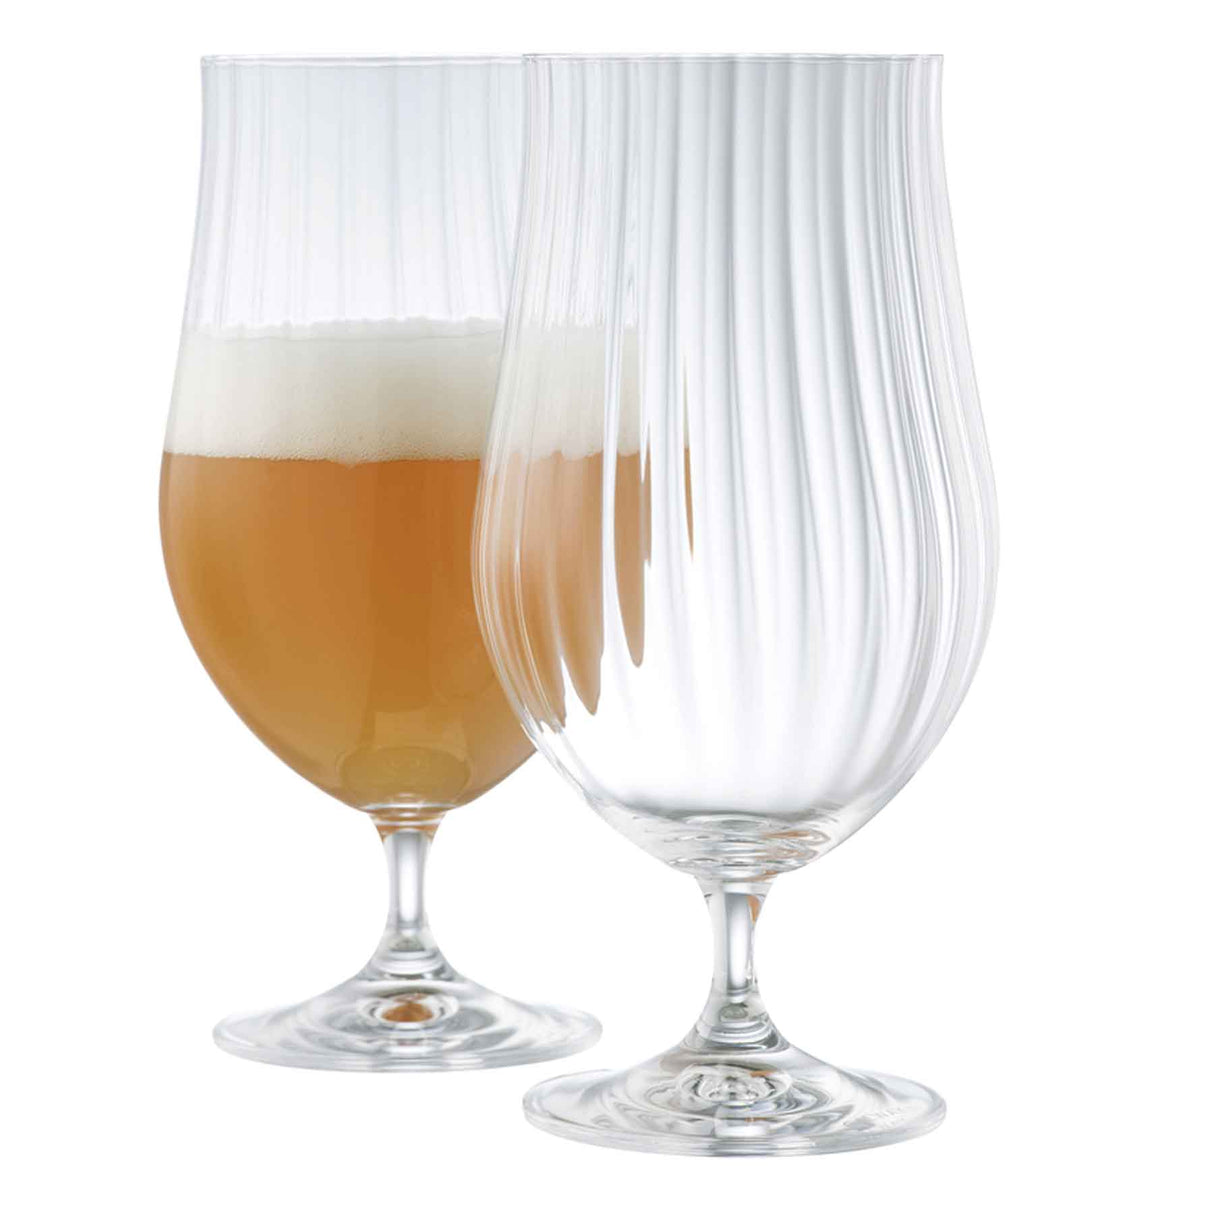 Galway Crystal Erne Craft Beer / Cocktail Glasses Pair - Creative Irish Gifts